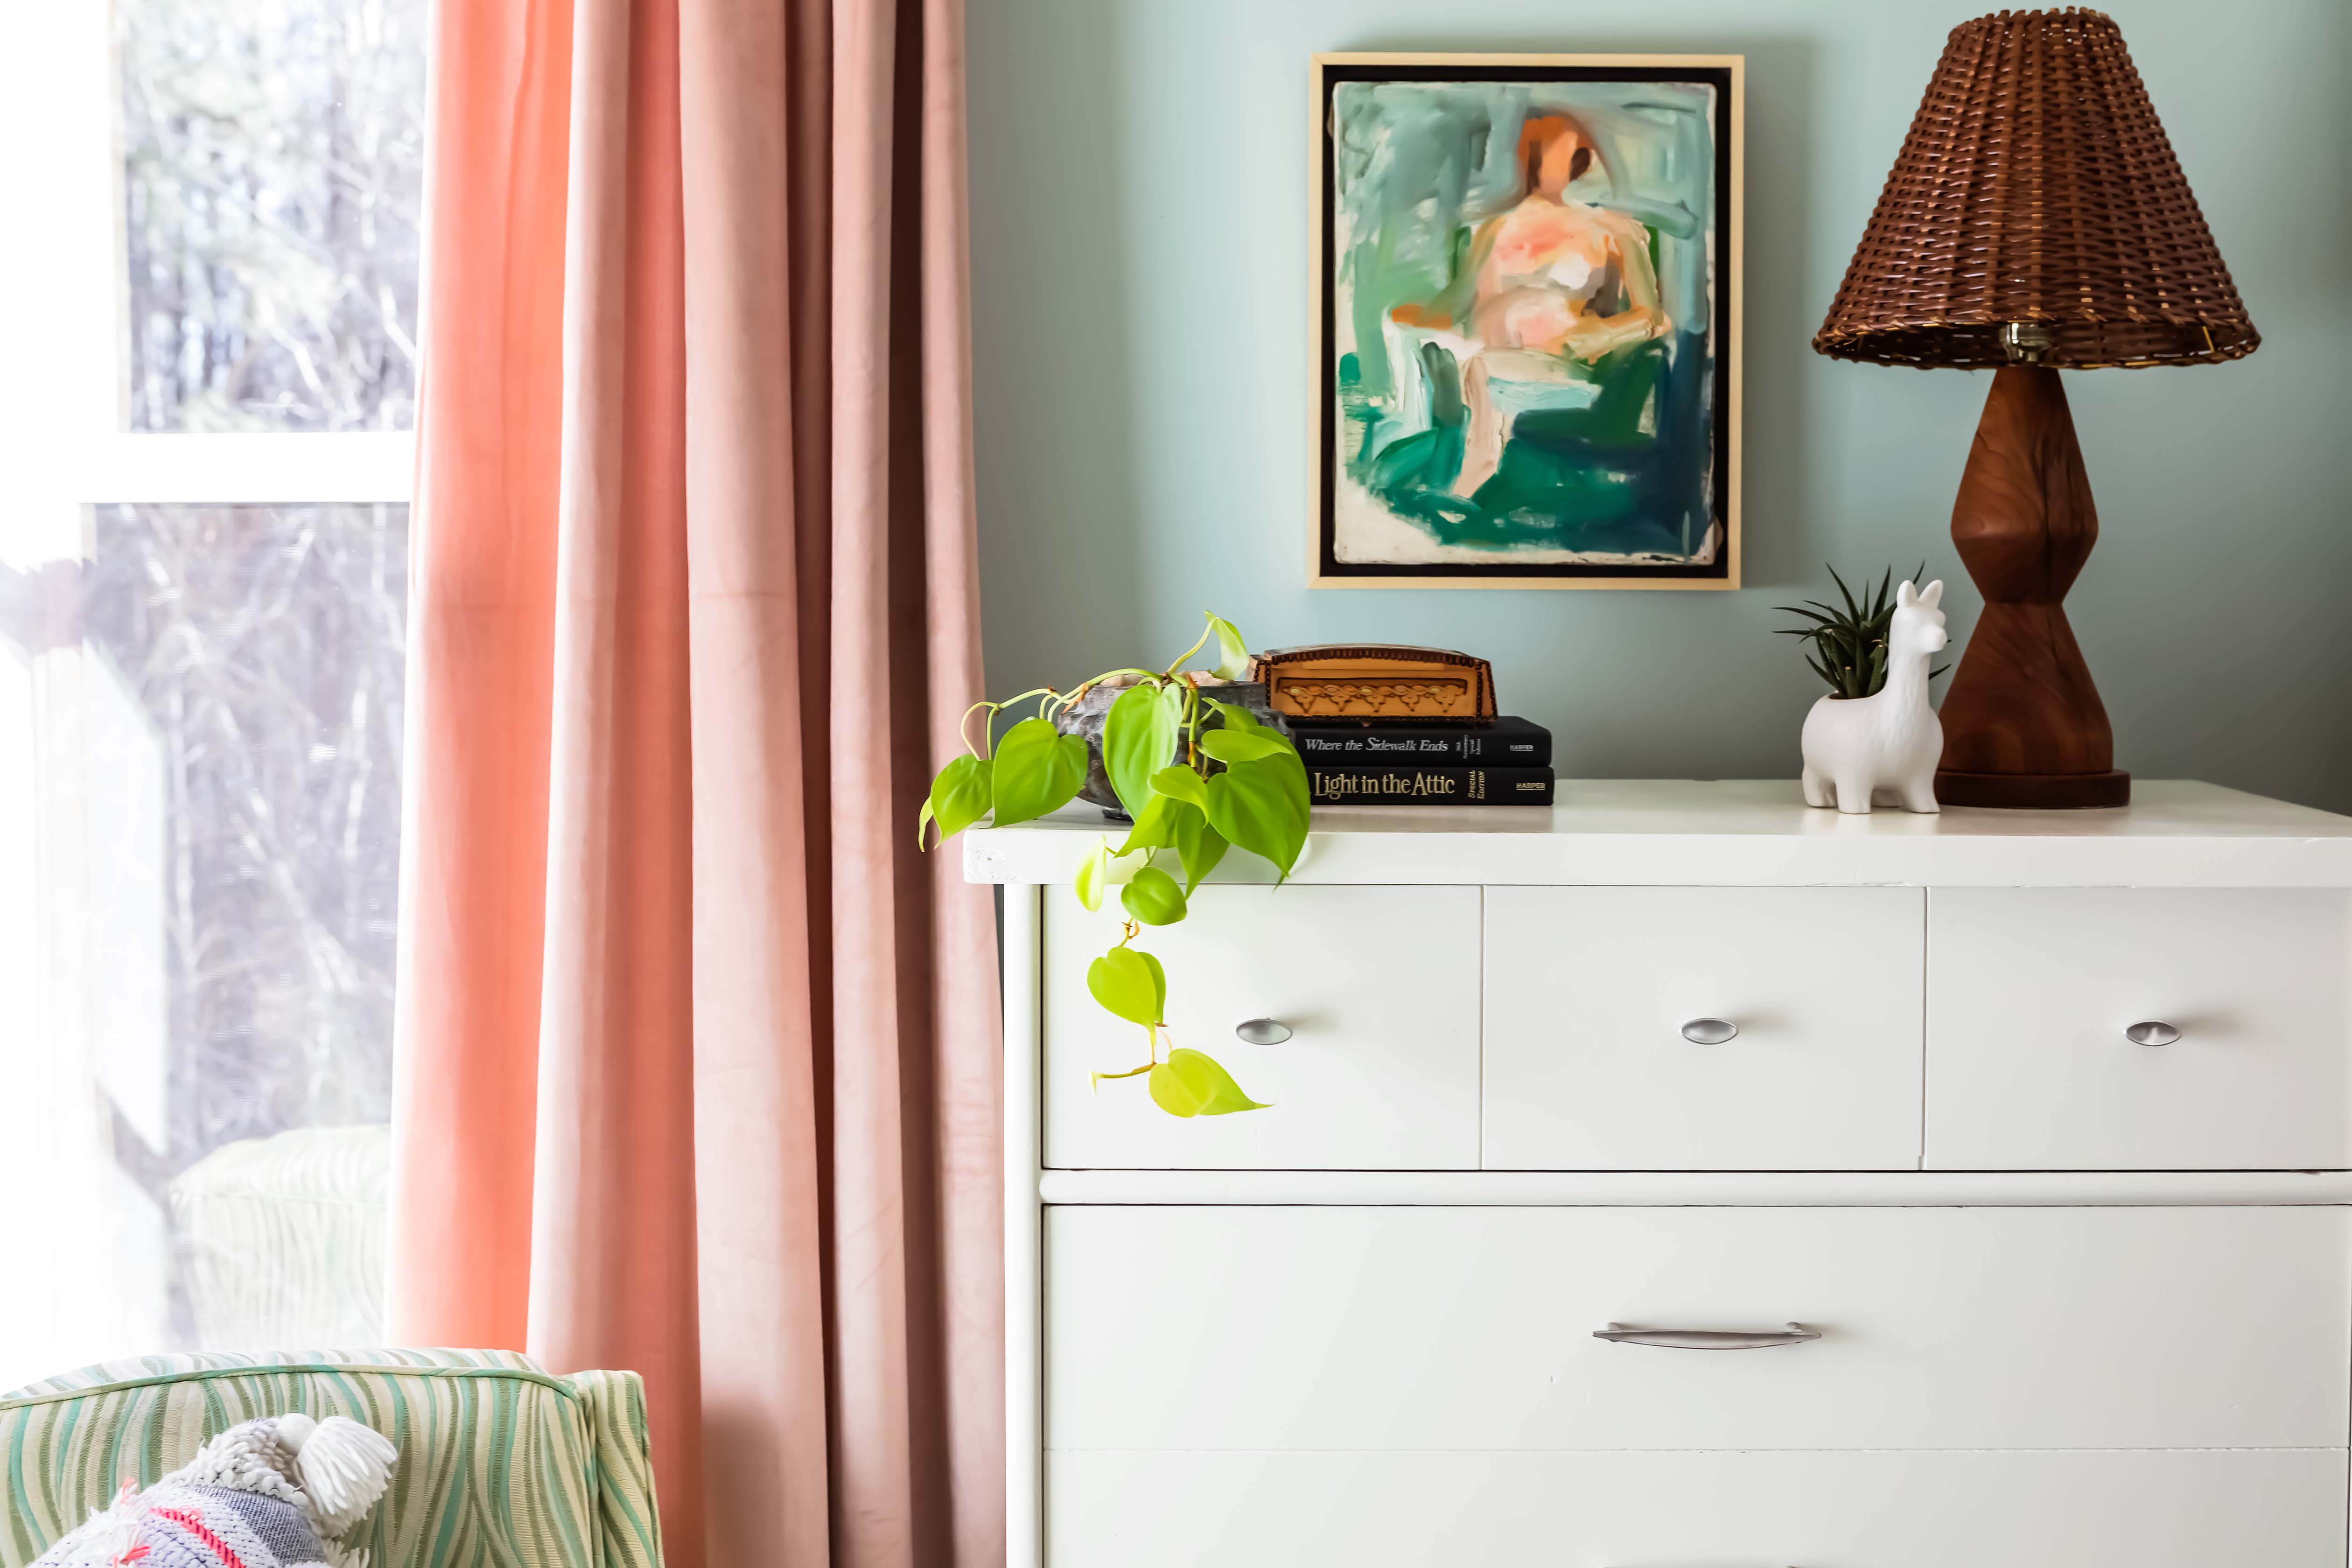 Try painting a dresser rather than replacing it - there are so many ways to give it a fresh look.